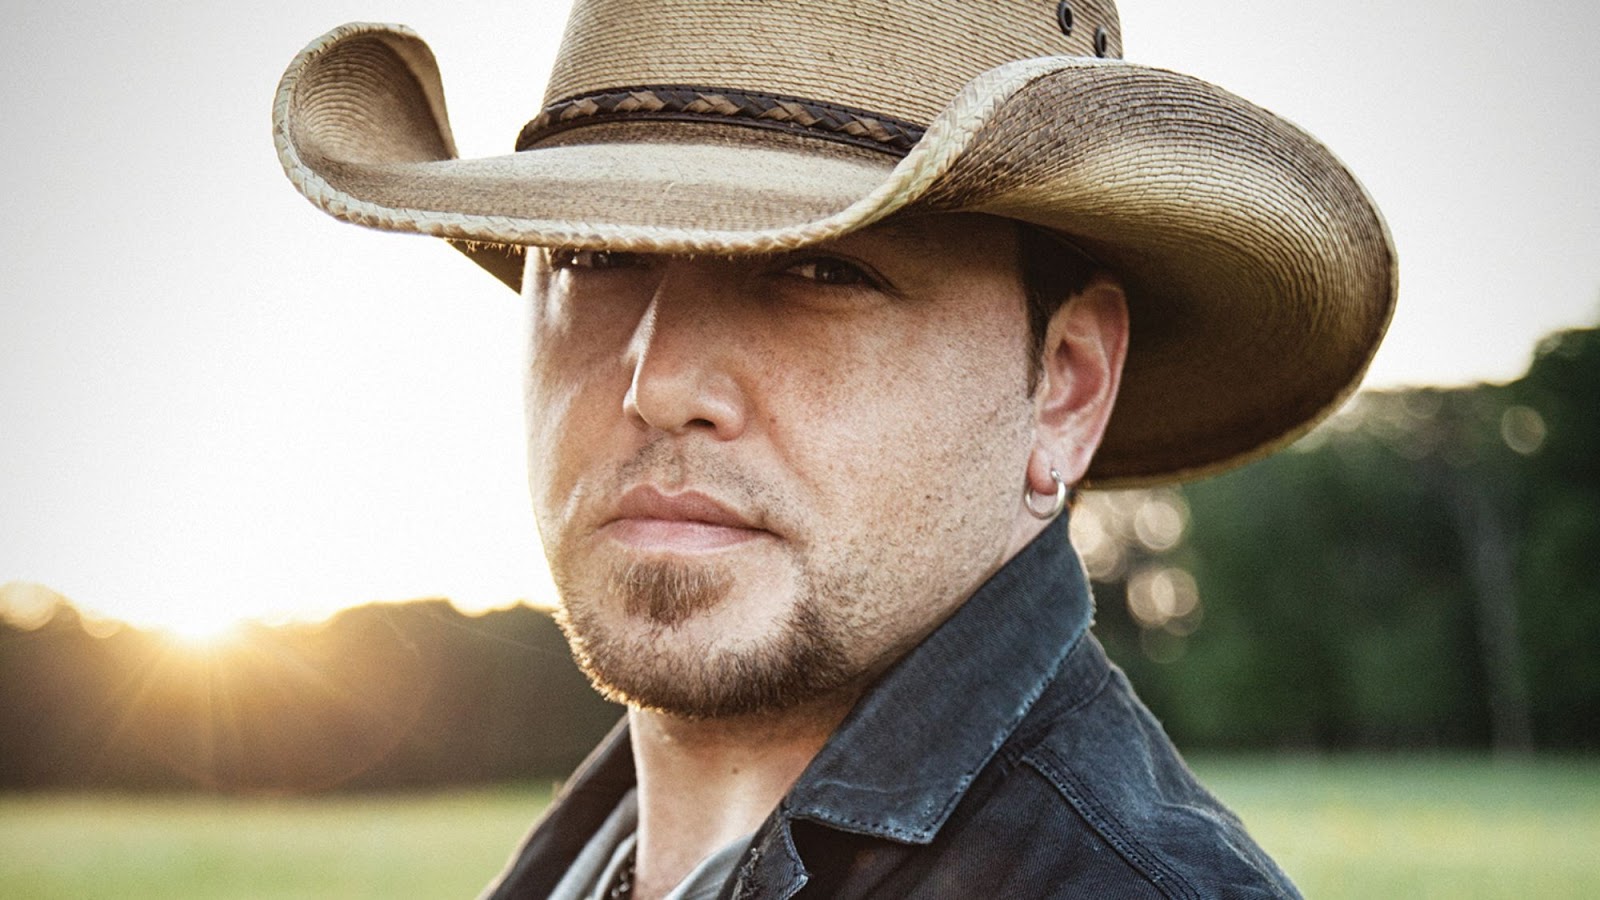 Jason Aldean Entertainer of the Year ACM Awards 2016. 